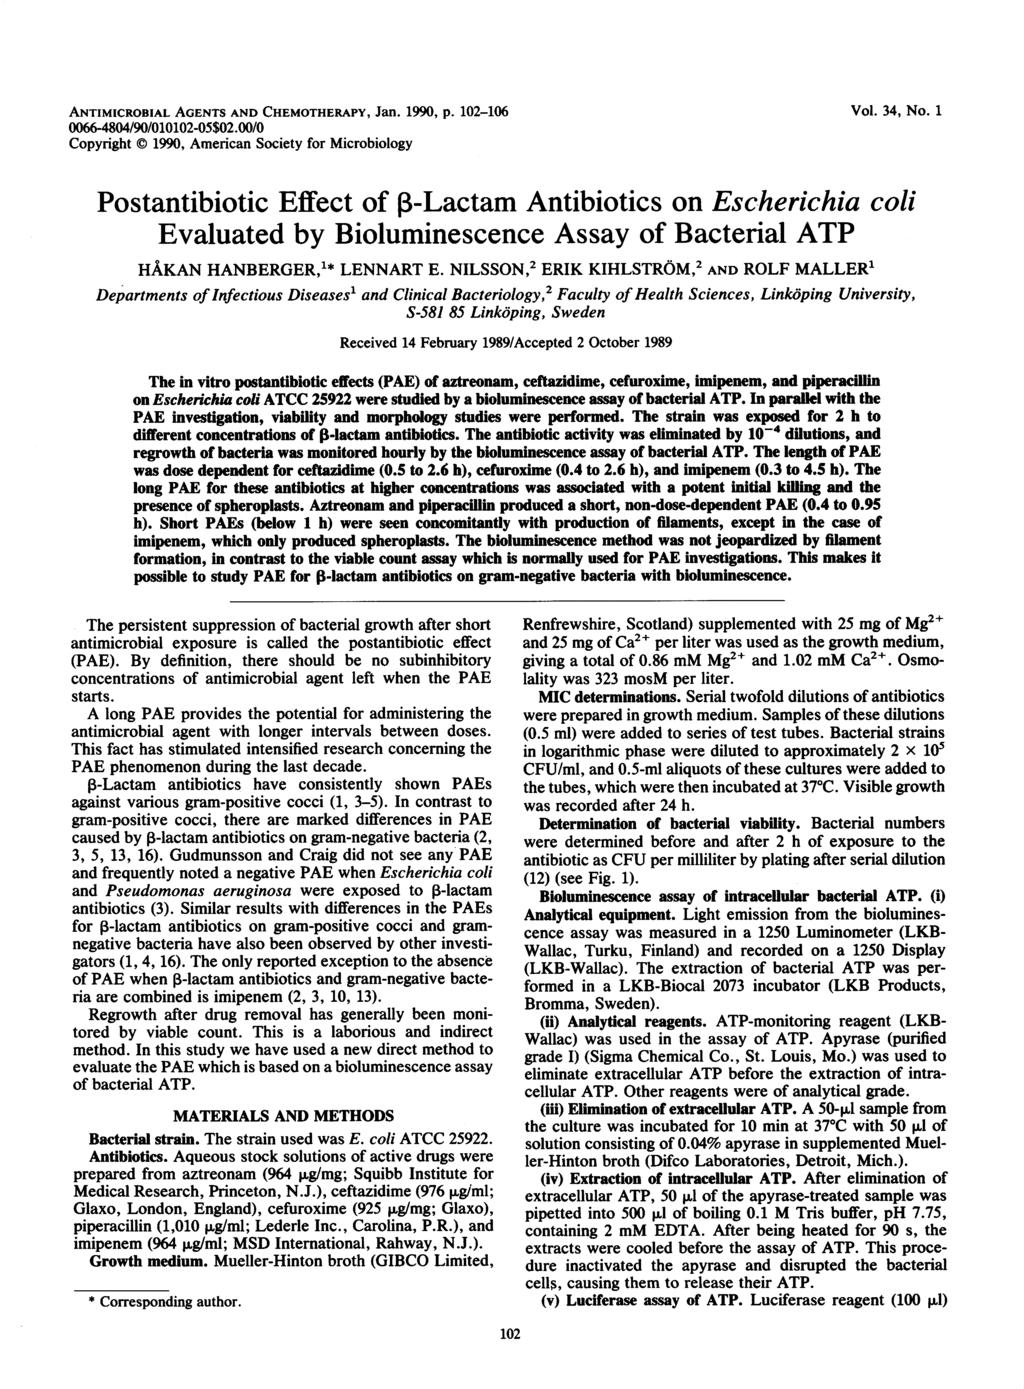 ANTIMICROBIAL AGENTS AND CHEMOTHERAPY, Jan. 199, p. 12-16 Vol. 34, No. 1 66-484/9/112-5$2.